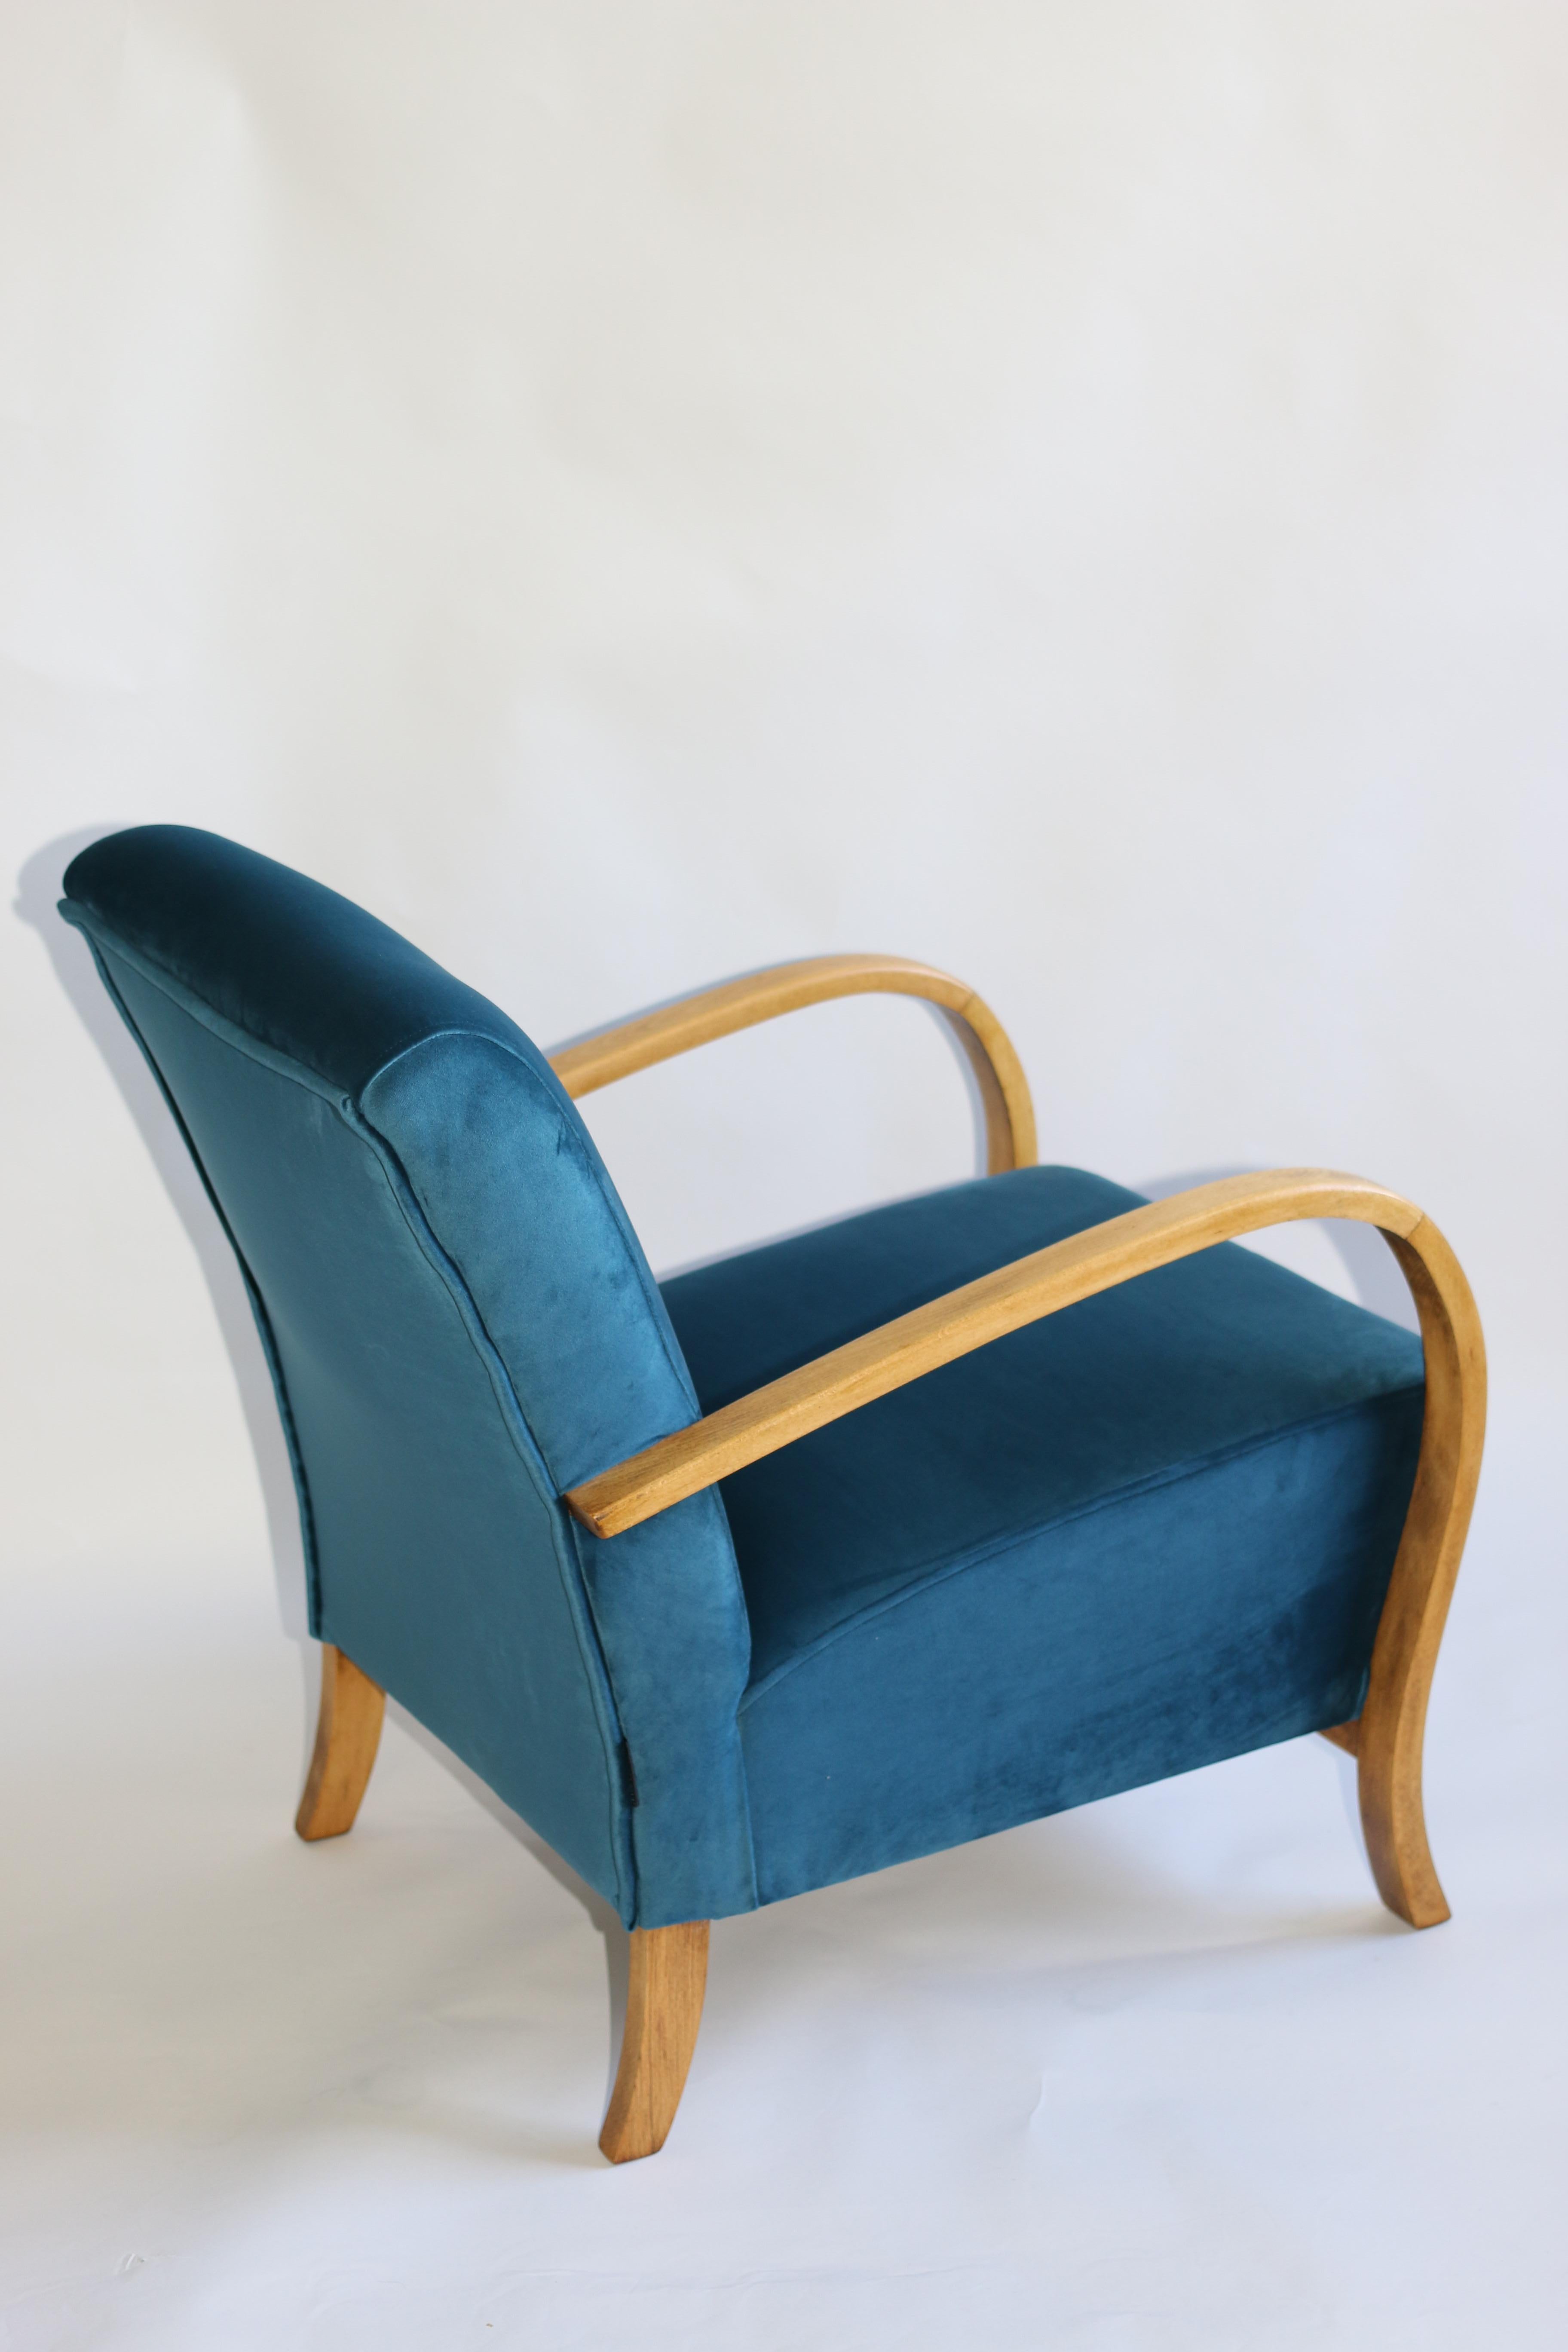 Woodwork Art Deco Armchair in Blue Marine Velvet from 20th Century For Sale